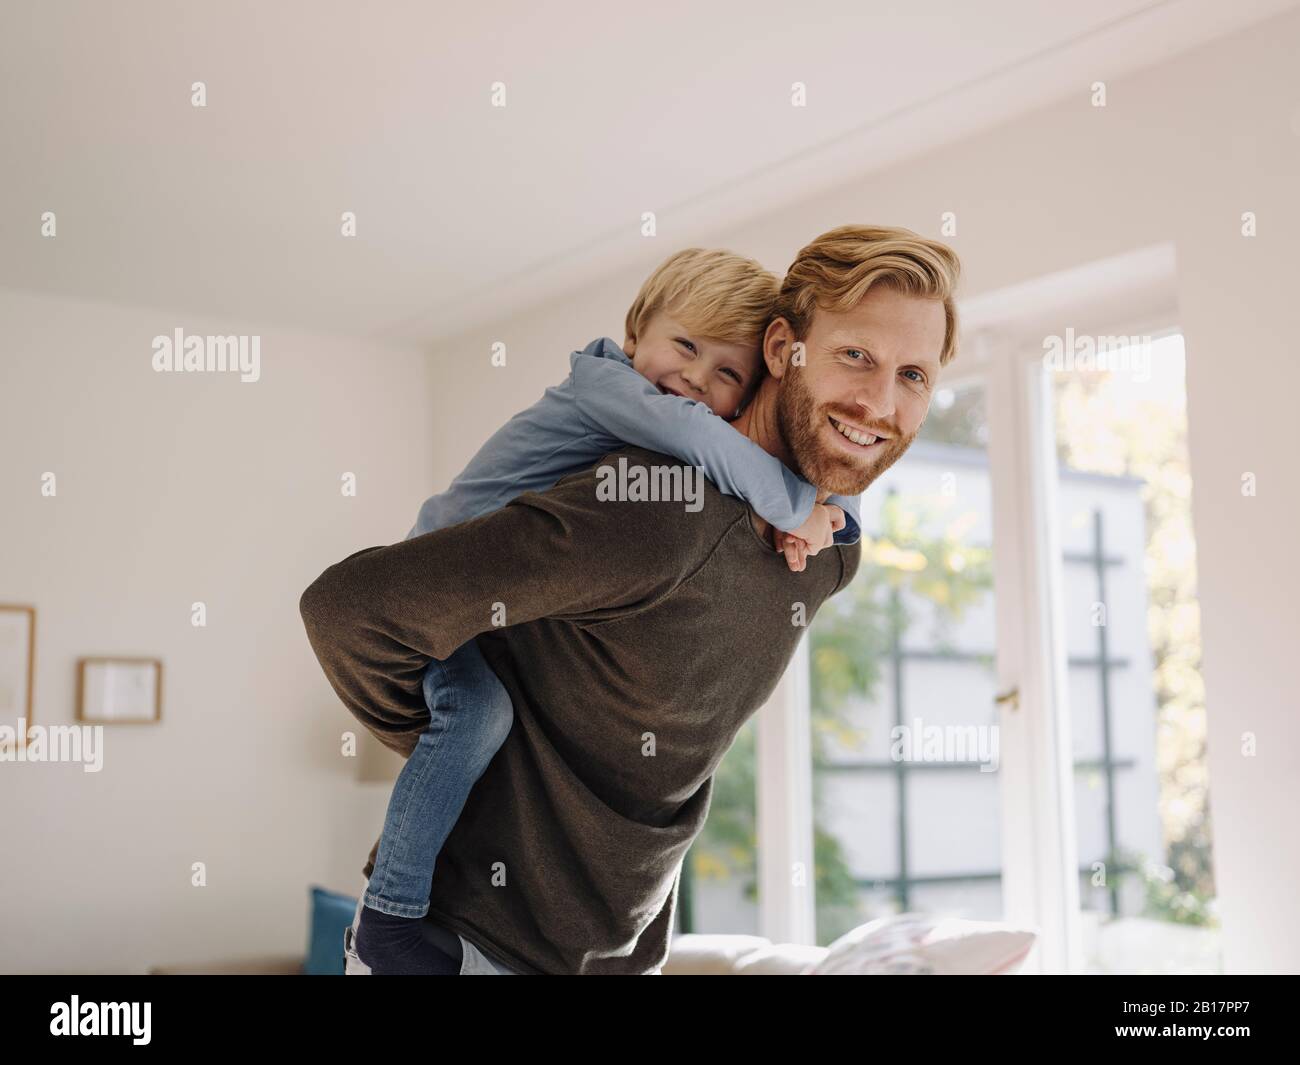 Portrait of happy father carrying son piggyback at home Stock Photo